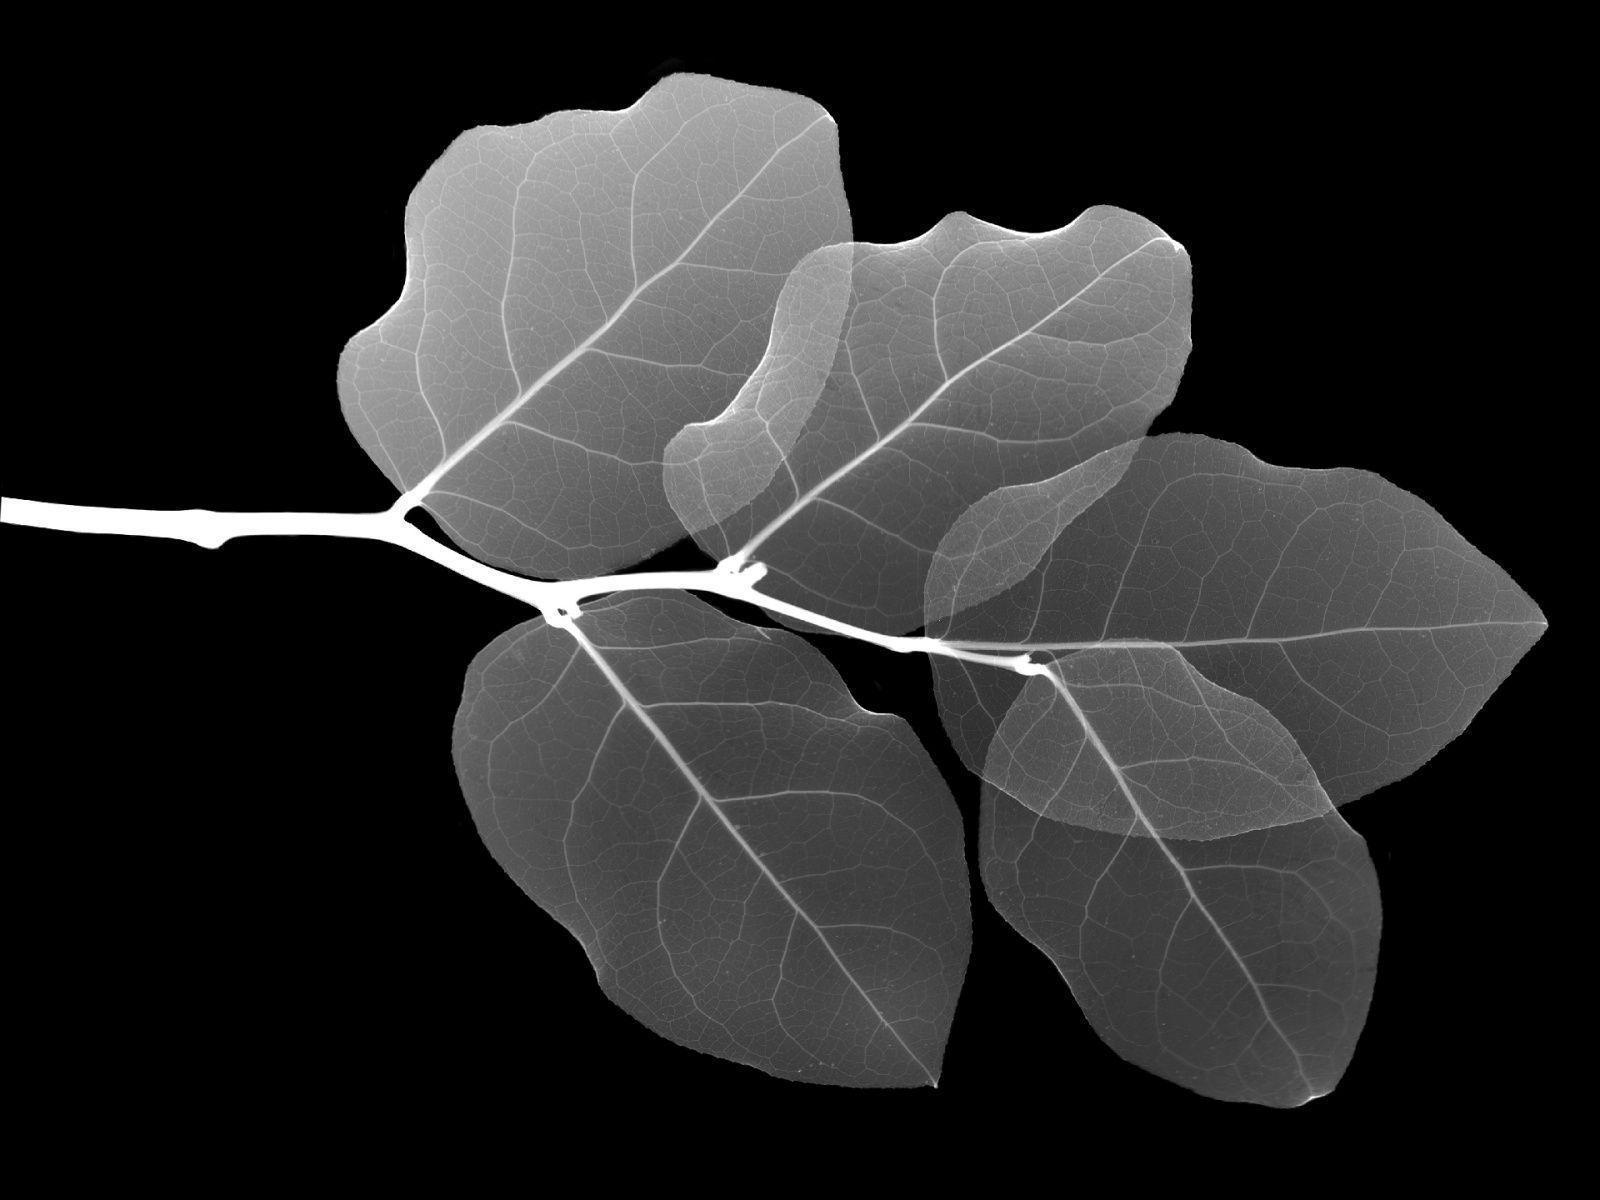 Leaf X Ray Wallpaper And Image, Picture, Photo